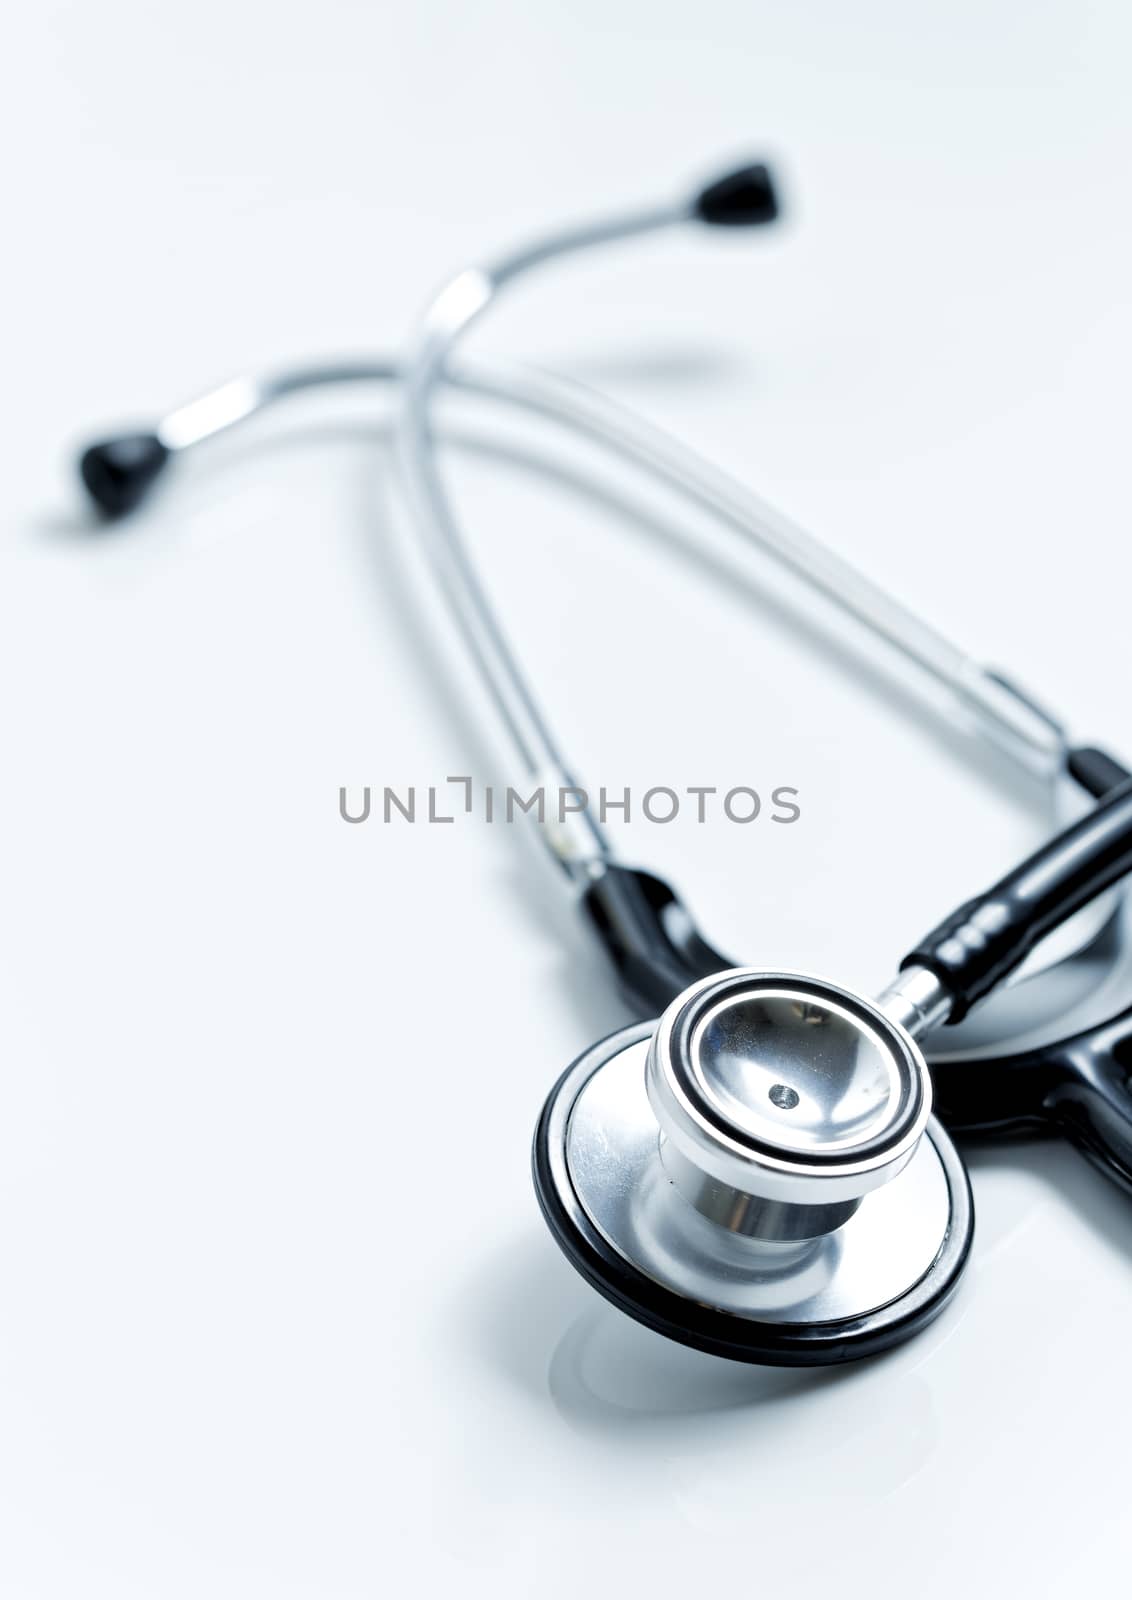 Stethoscope object close up for texture